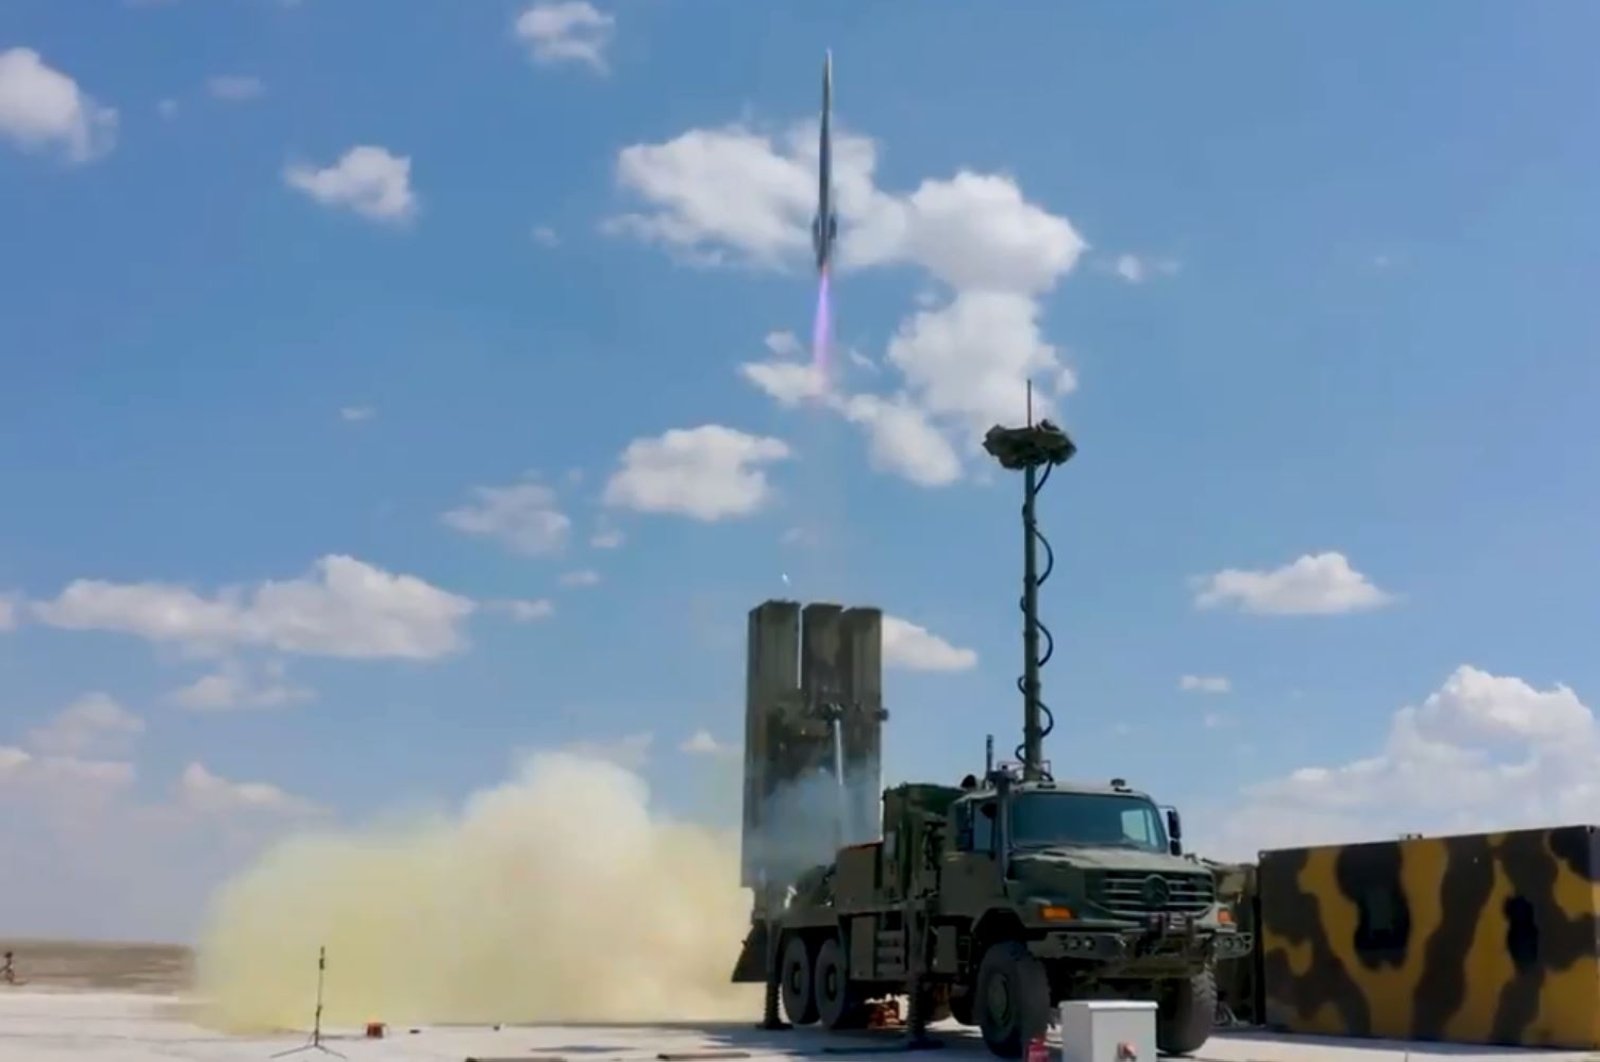 A screengrab from the video showing the Hisar O+ air defense system's test firing, July 10, 2021. (DHA Photo)